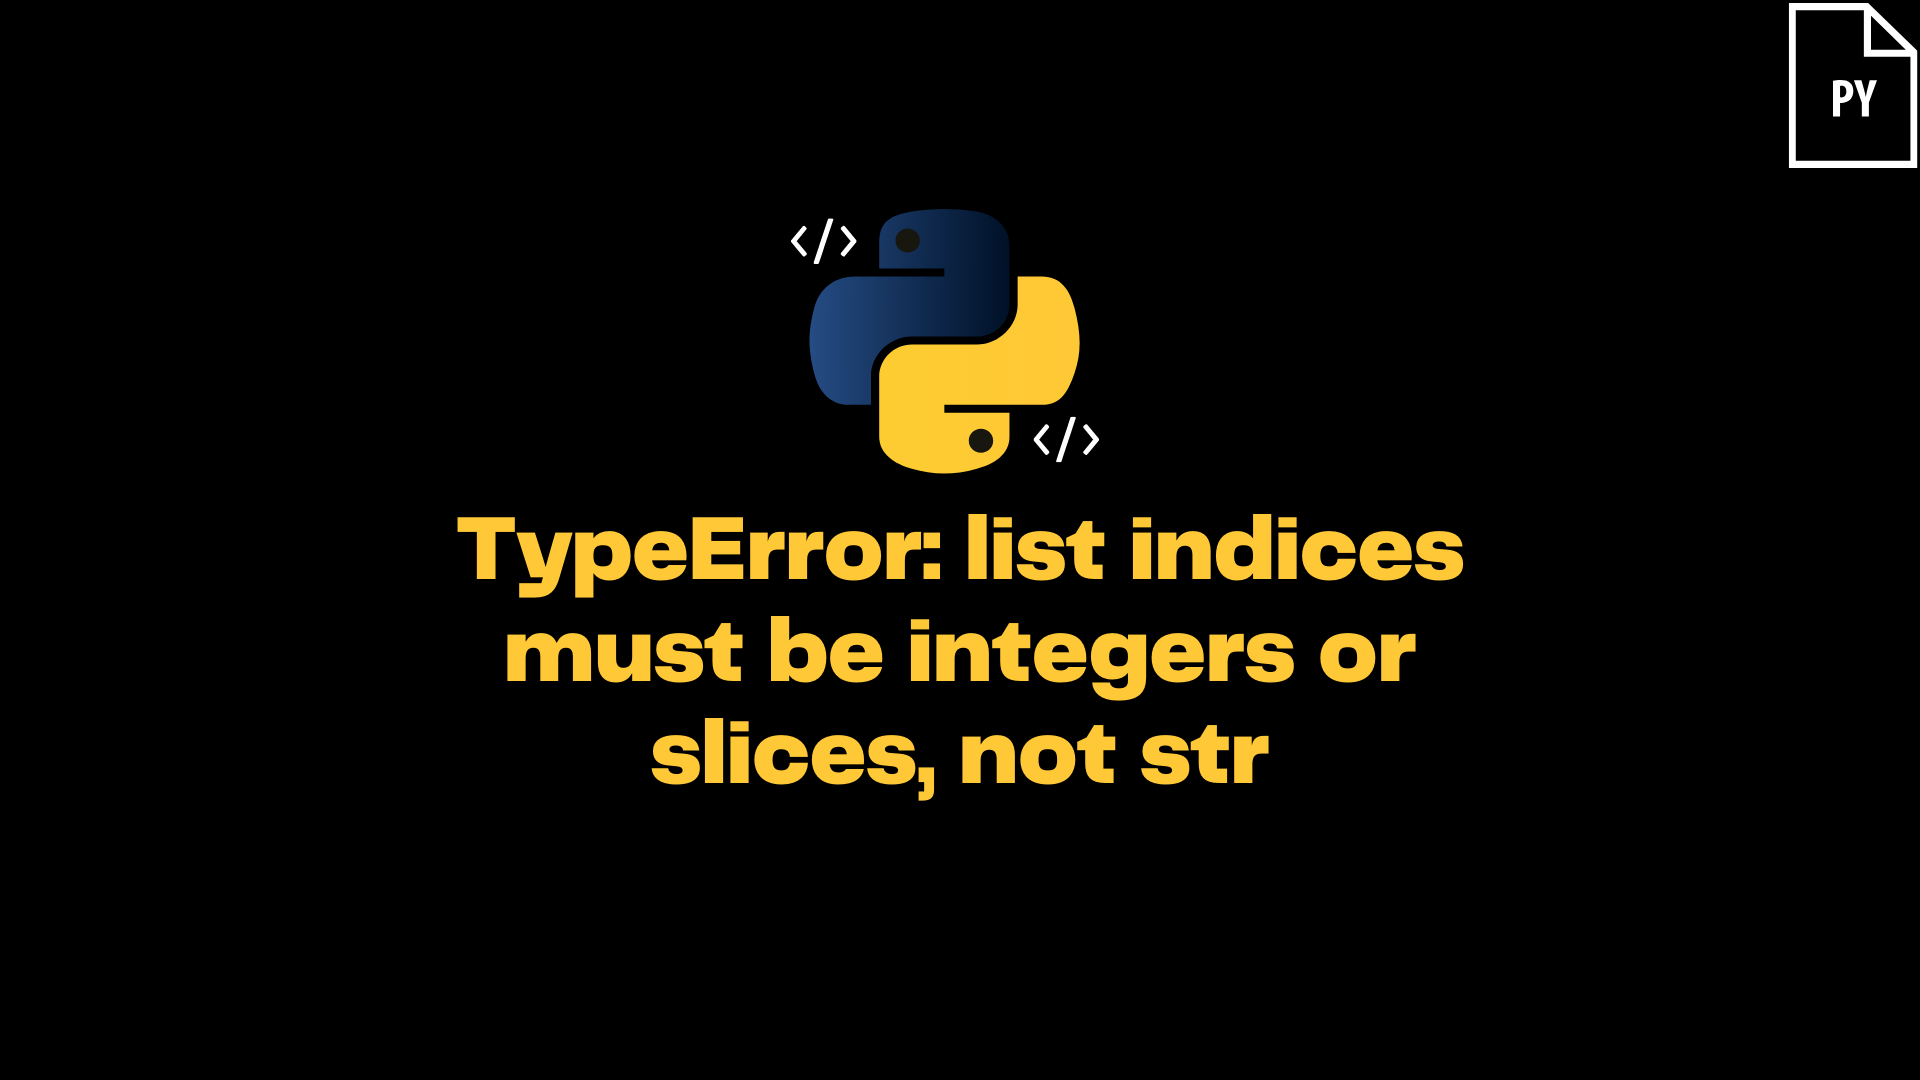 ItsMyCode: TypeError: list indices must be integers or slices, not